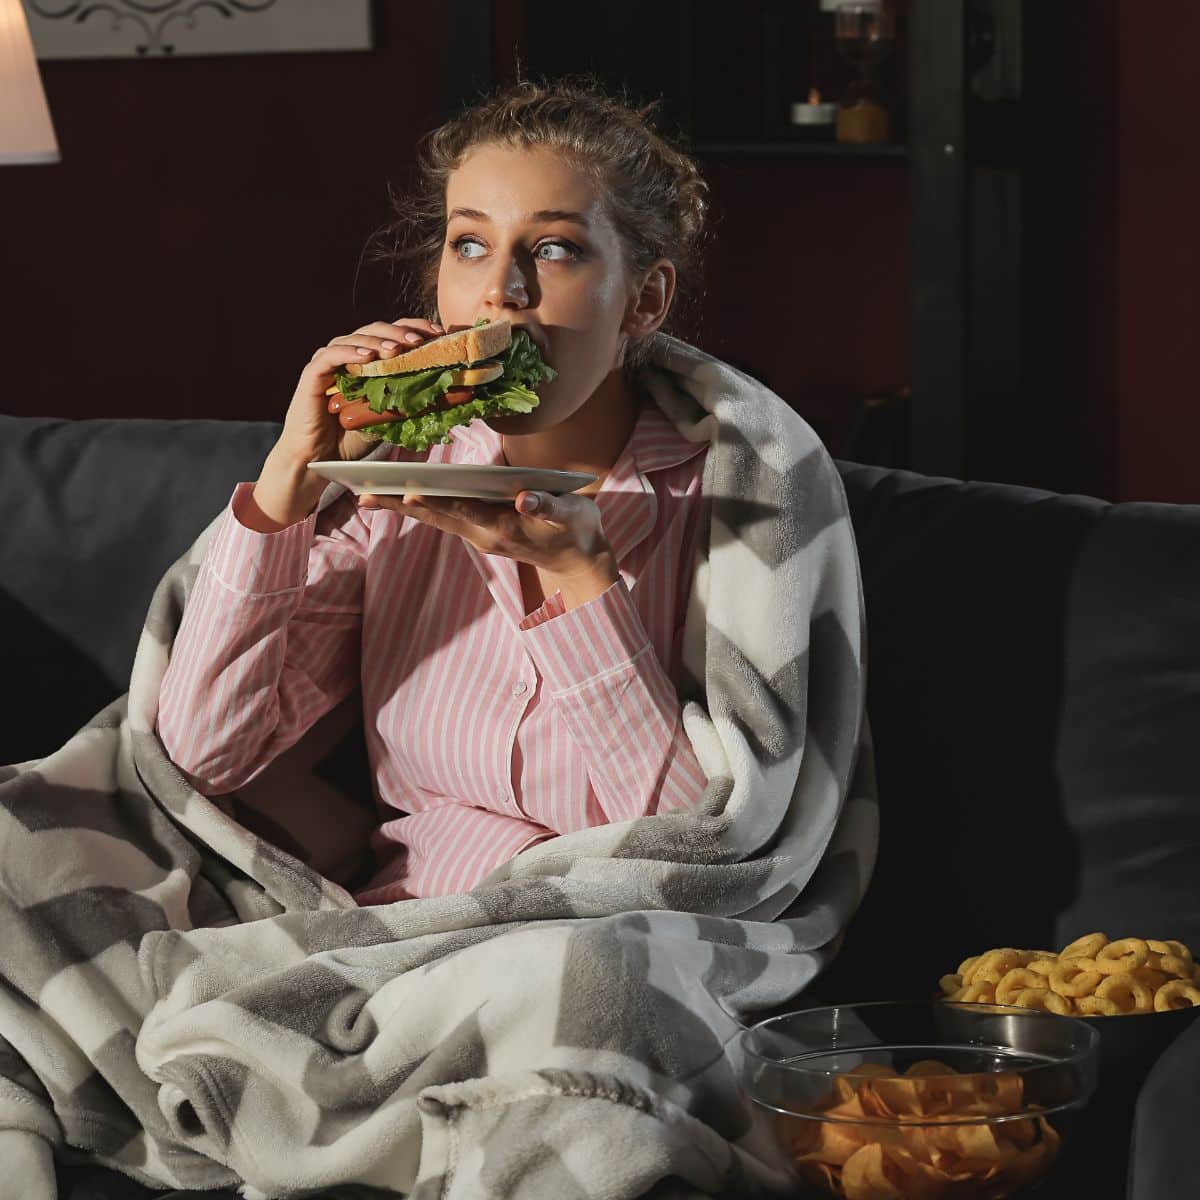 woman sitting on the couch at night with snacks around her, eating a sandwich.